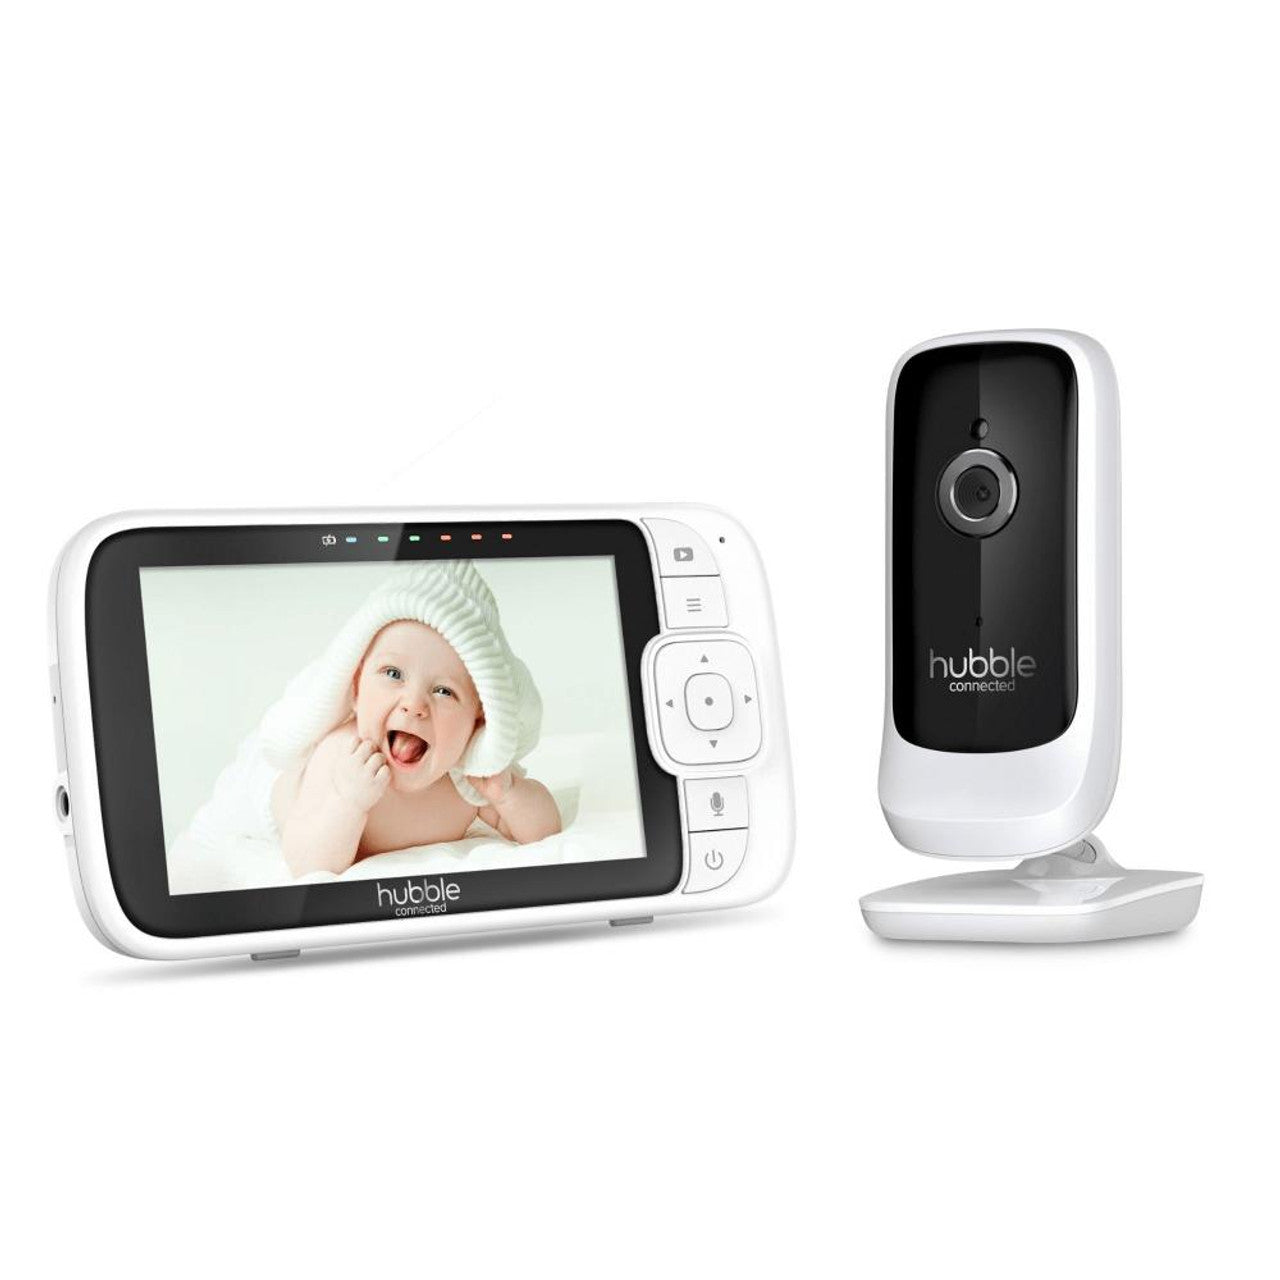 Hubble Nursery View Premium 5" Baby Monitor - White & Black | 5012786049994 from Hubble - DID Electrical